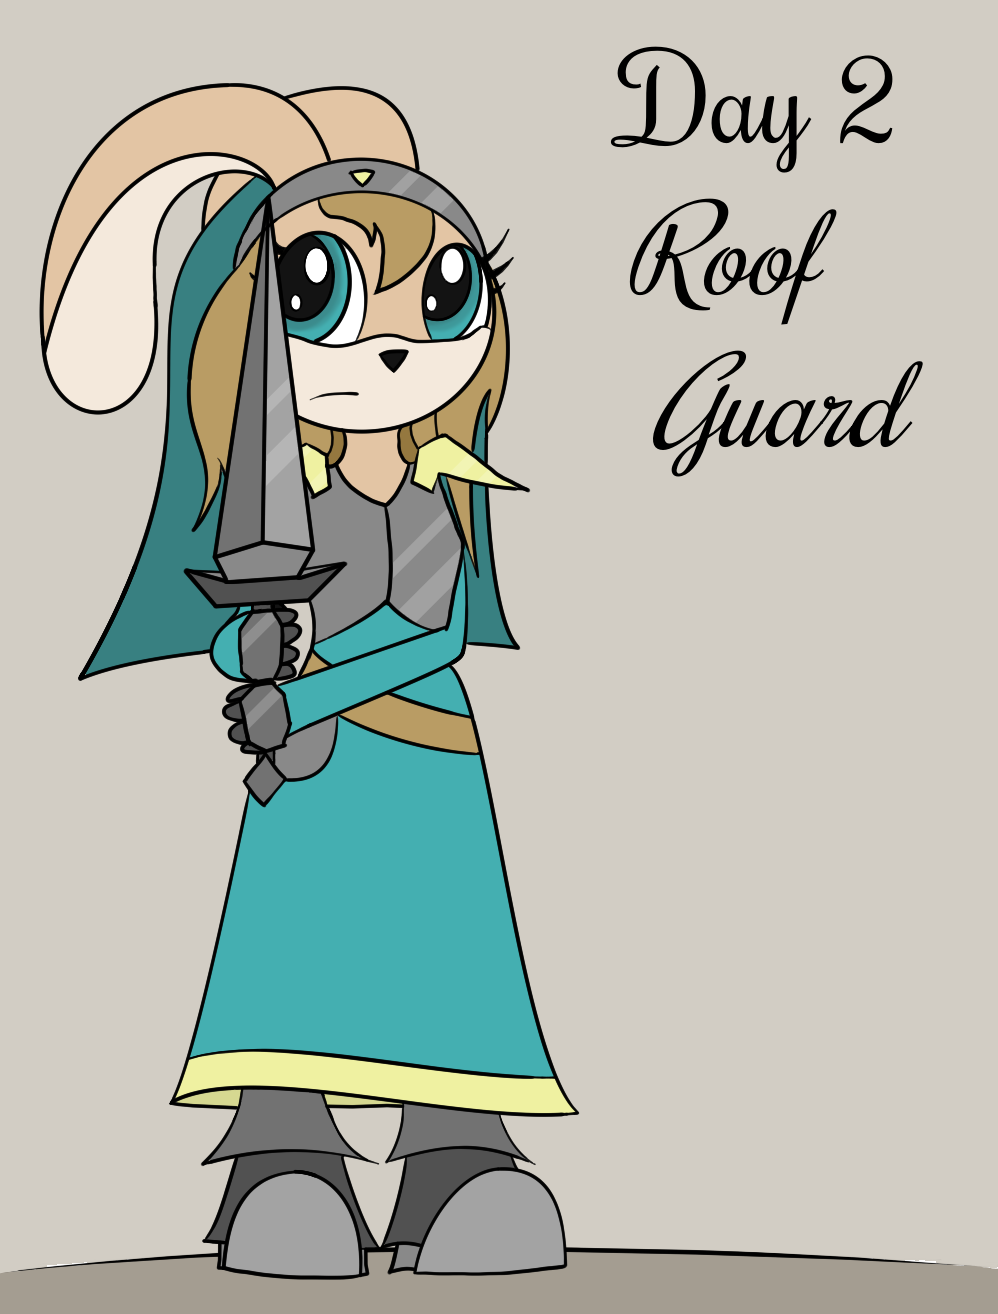 Day 2 - Roof Guard